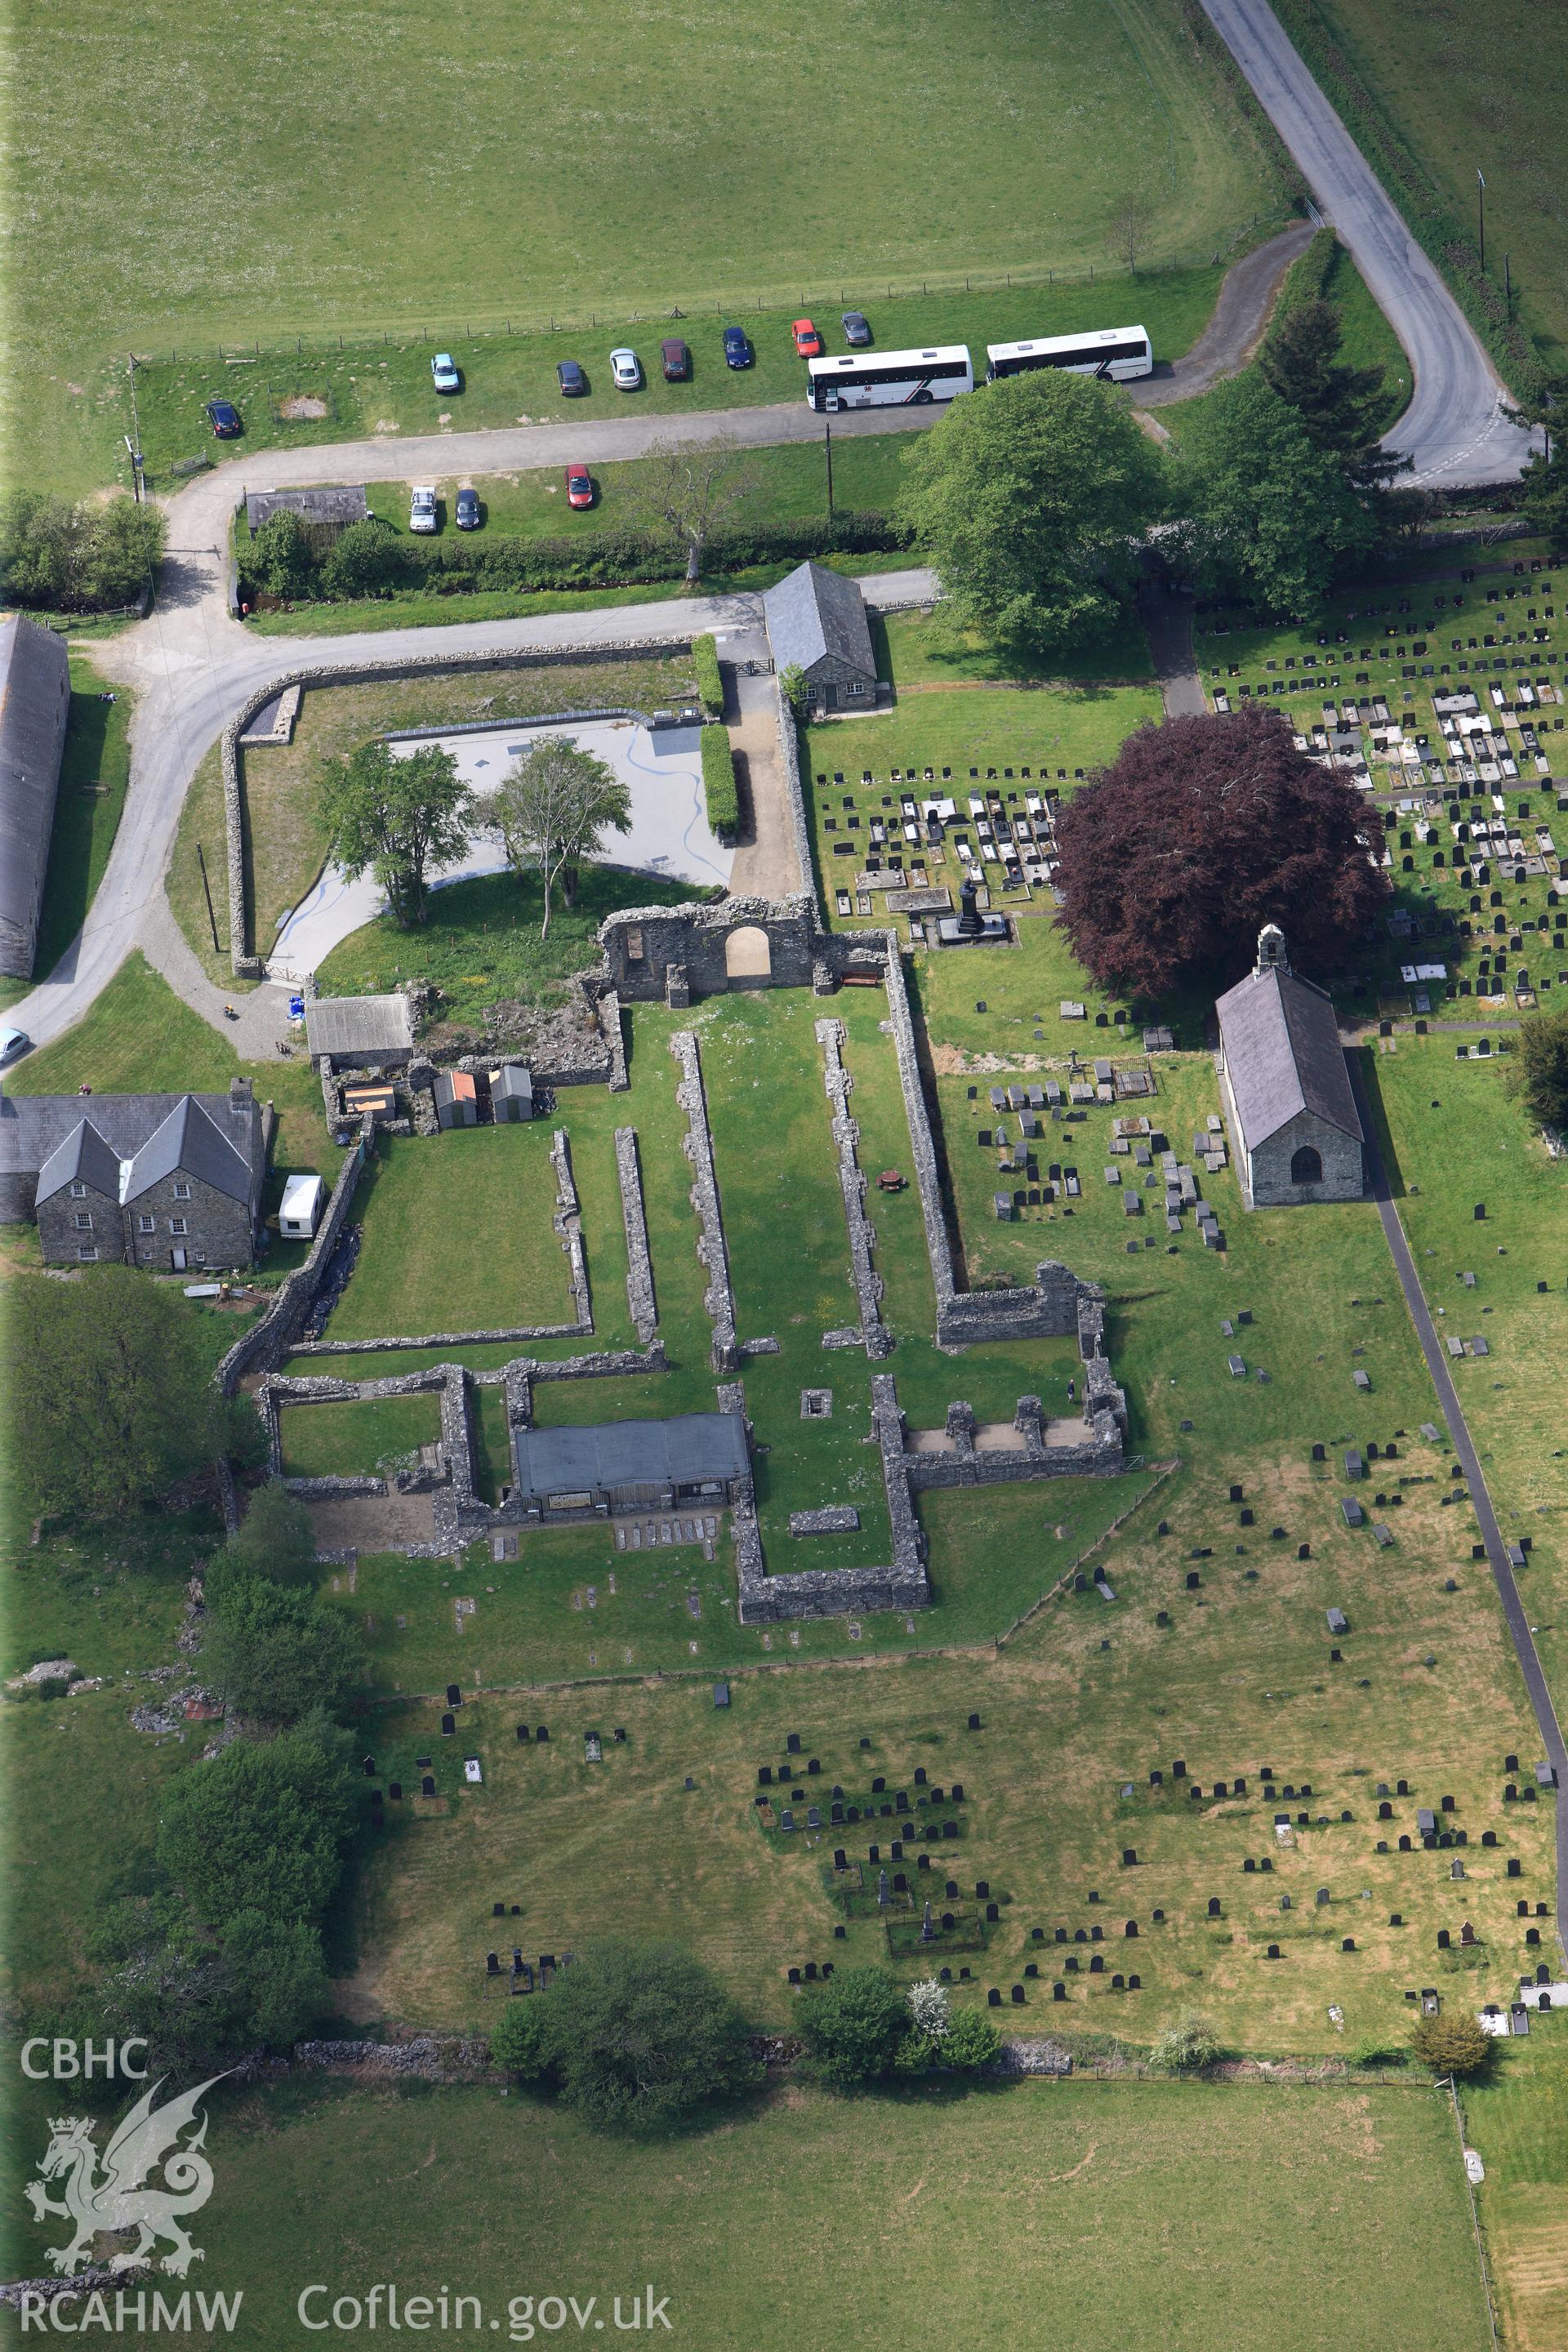 RCAHMW colour oblique photograph of Strata Florida Abbey. Taken by Toby Driver on 28/05/2012.